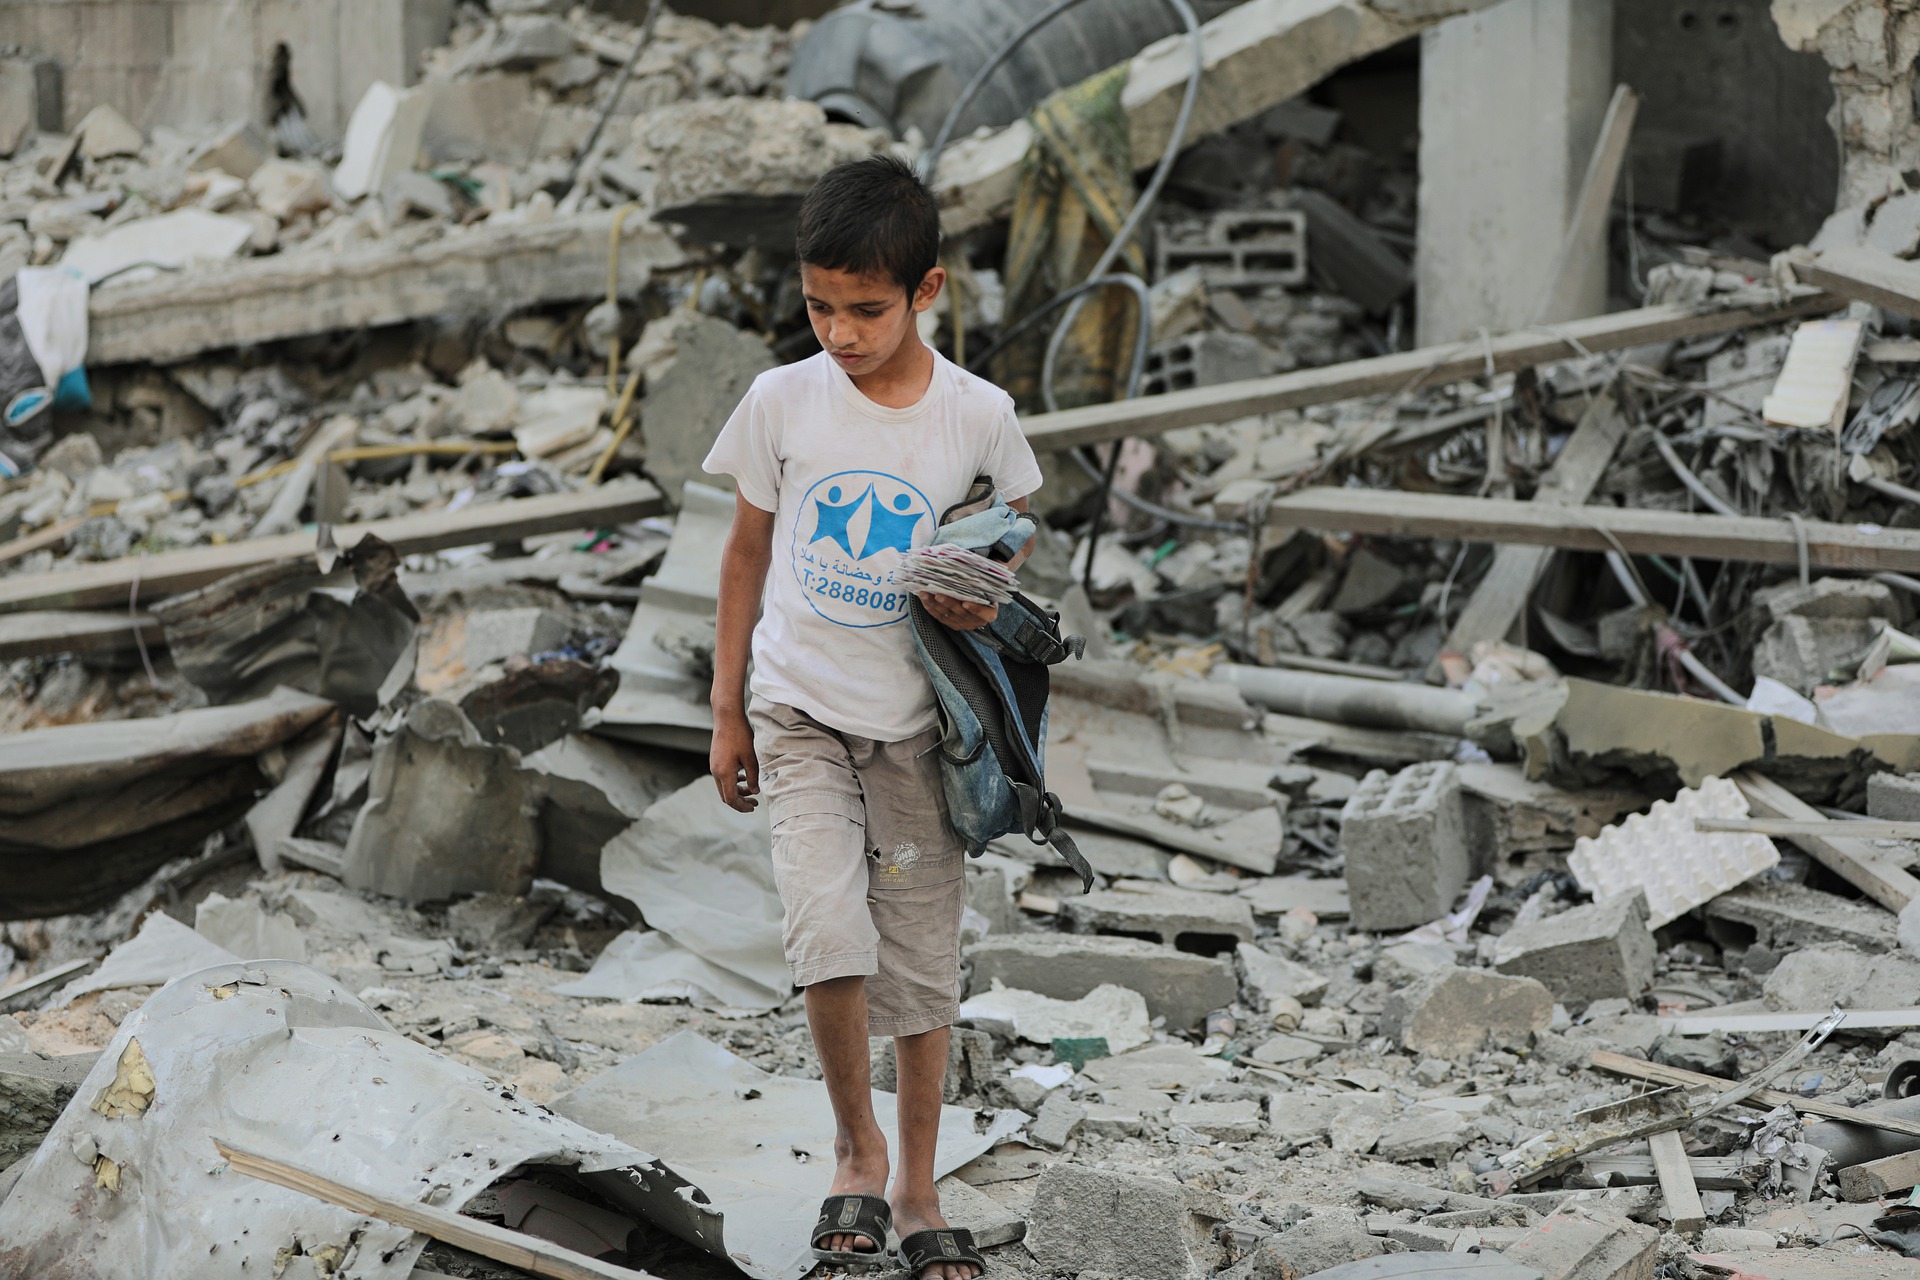 Structural Violence and Early Childhood Development: The Children of Gaza